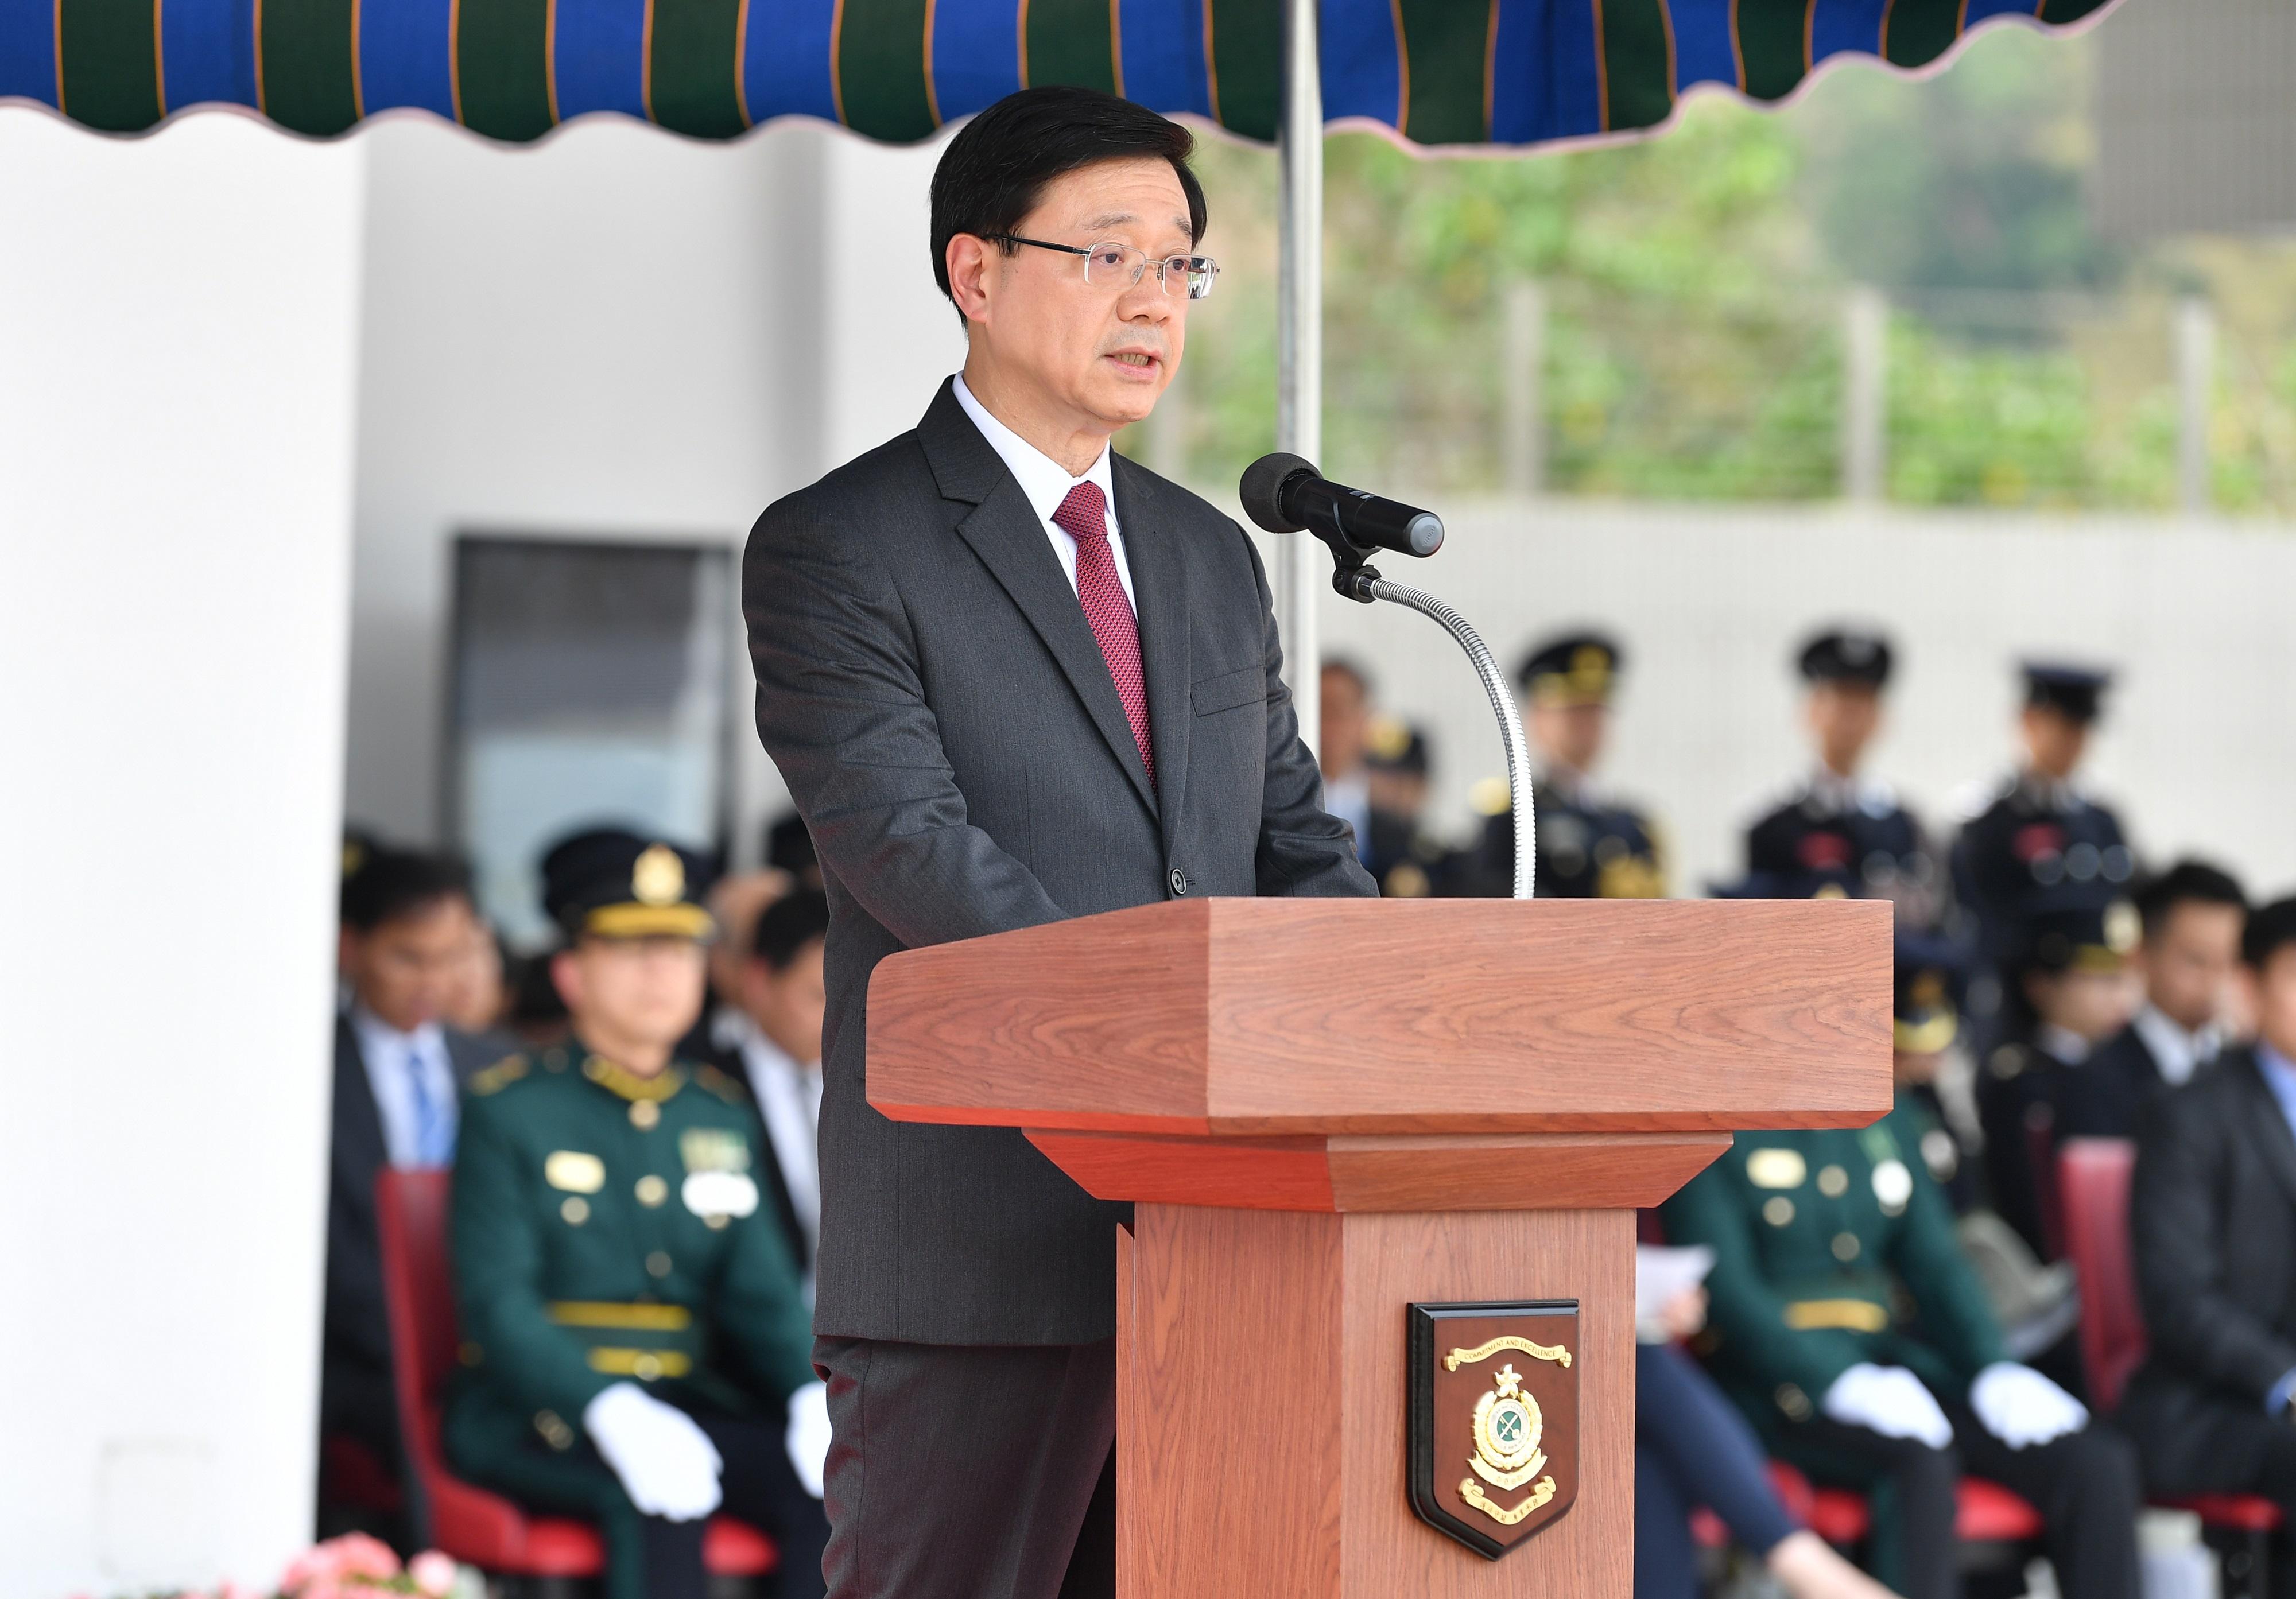 The Chief Executive, Mr John Lee, delivers a speech at the Hong Kong Customs Passing-out Parade today (March 24).